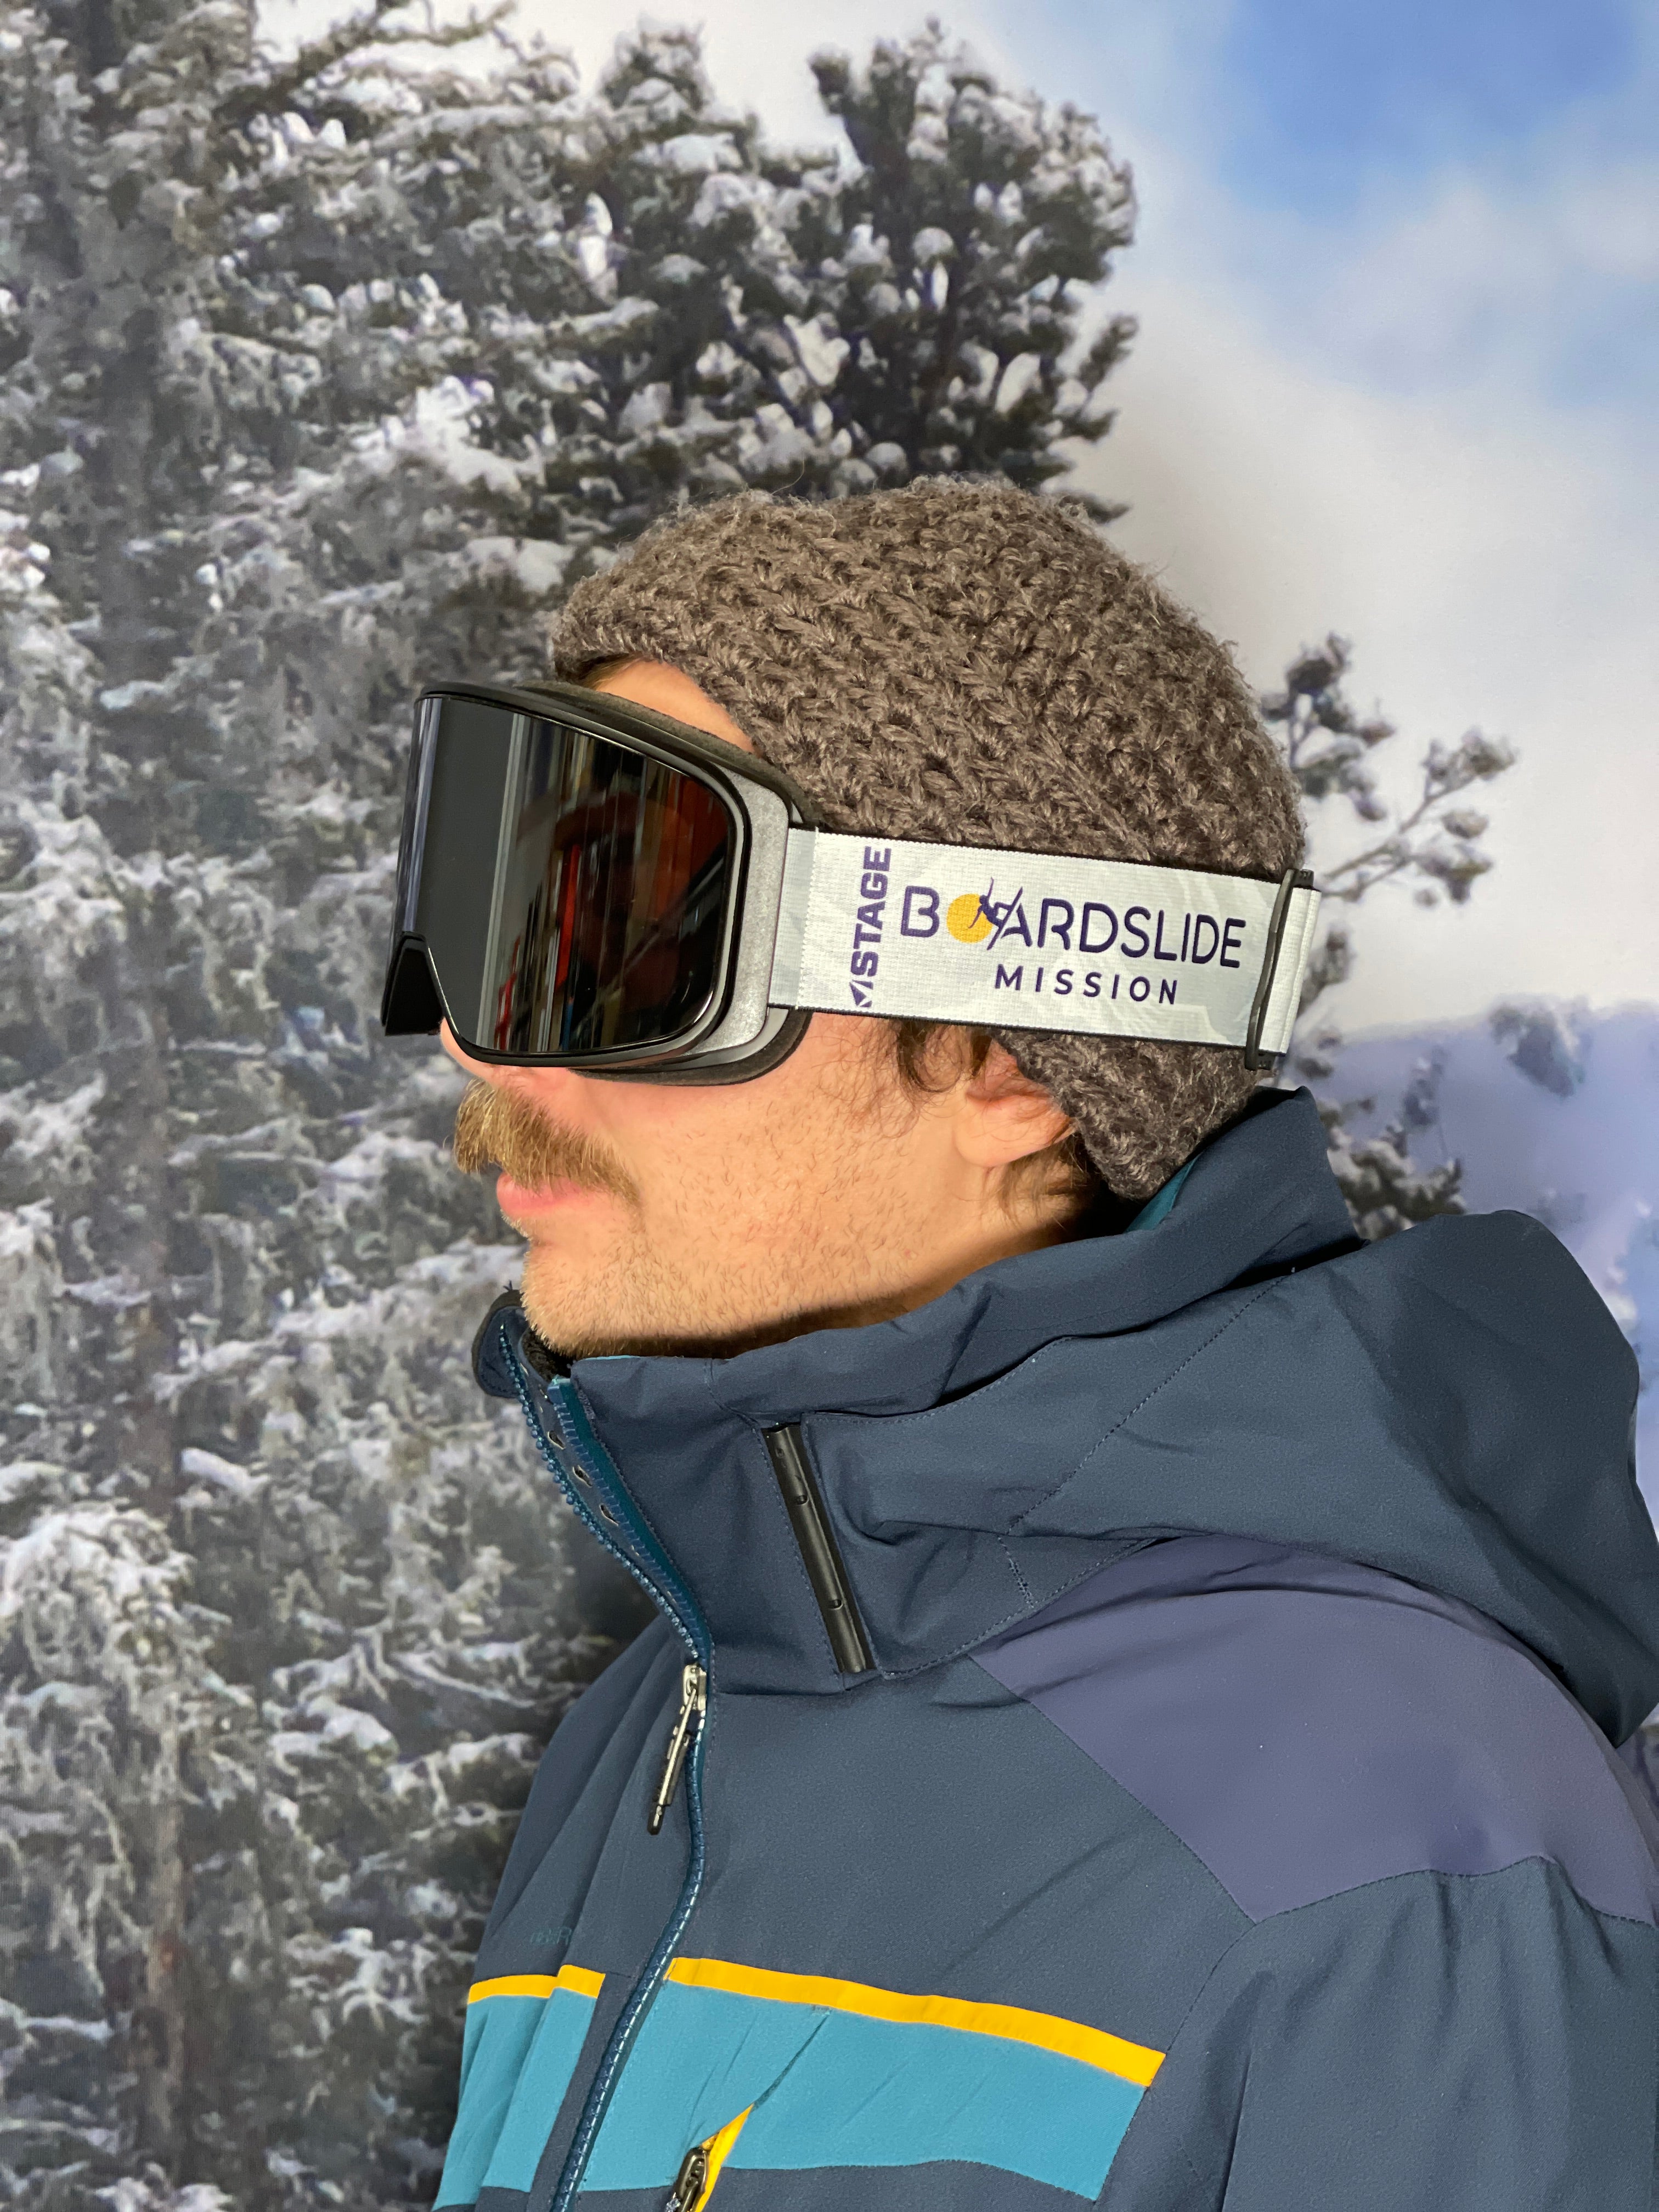 A man profile view wearing a knitted brown beanie and STAGE custom ski goggles. The goggles strap has "BOARDSLIDE MISSION" printed on it. He is dressed in a blue and gray winter jacket with yellow stripes, set against a backdrop of snow-covered trees.